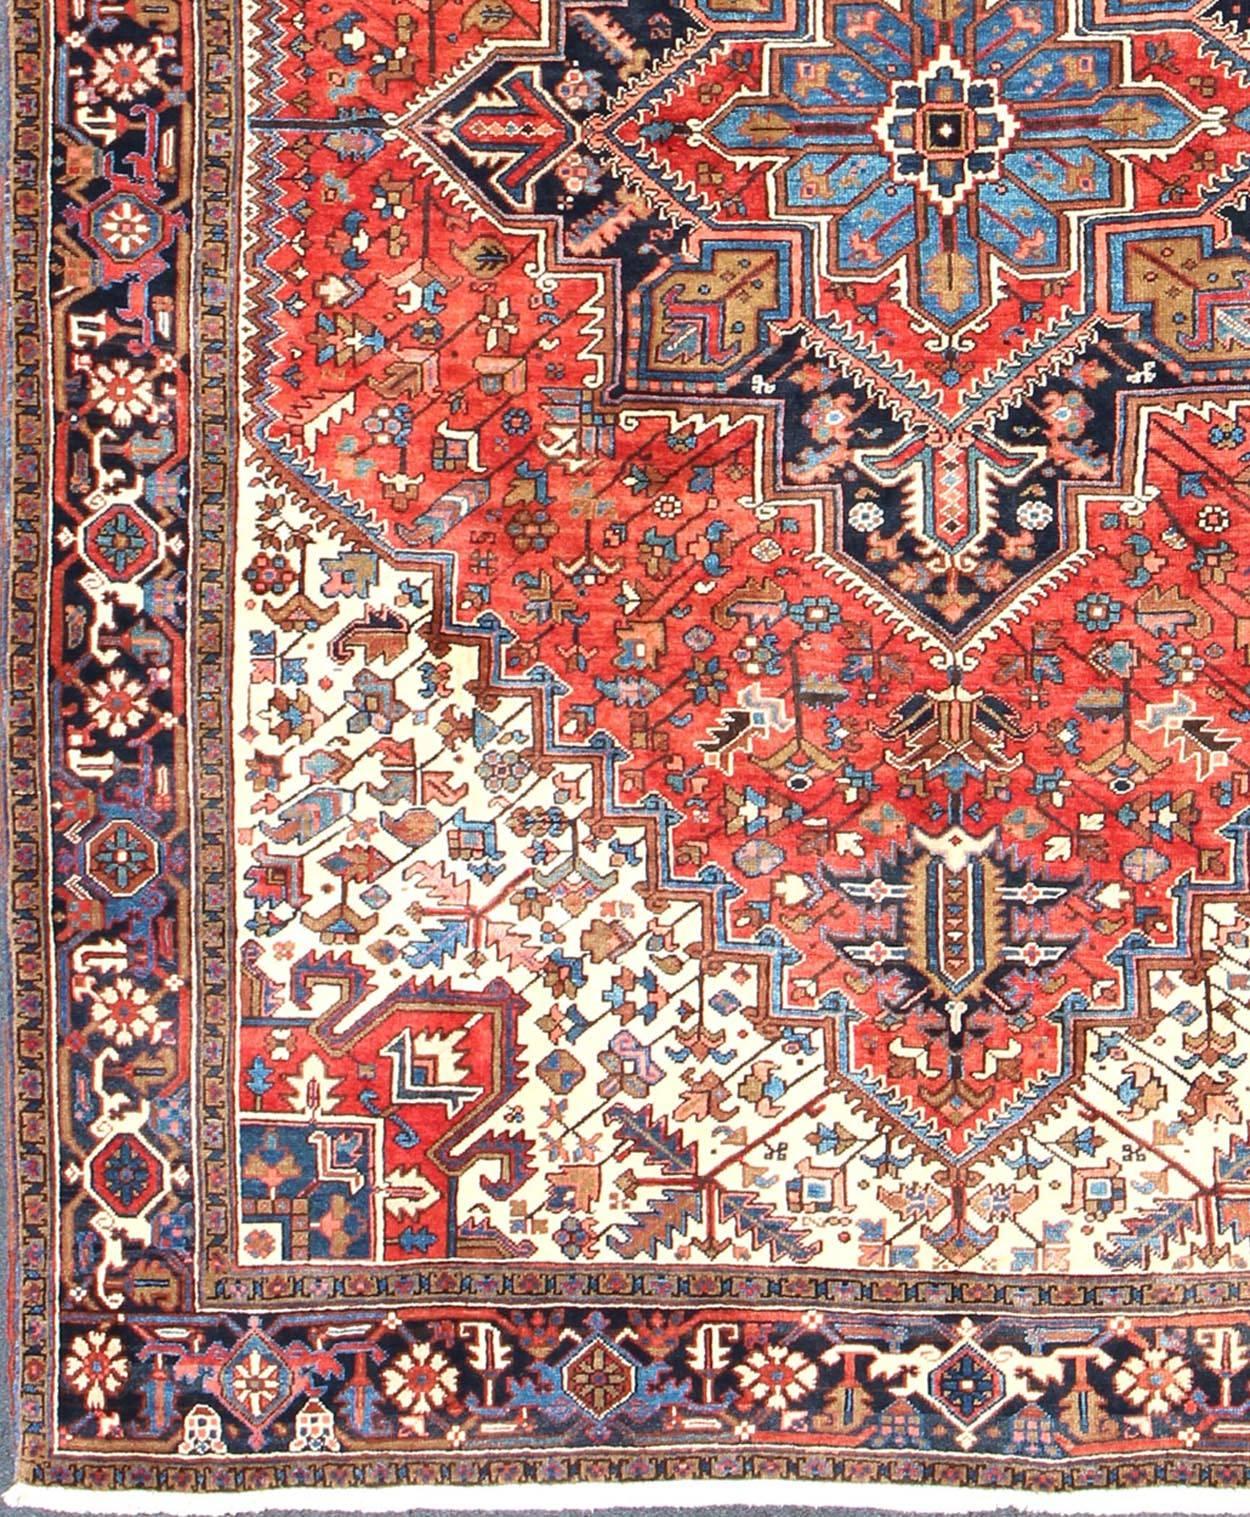 Stylized Semi Antique Persian Heriz rug with center Medallion Design in Rust Red and Blue, rug dsp-rmk9719, country of origin / type: Iran / Heriz, circa 1950

This beautiful semi antique Persian Heriz carpet from the mid-20th century (circa 1950)